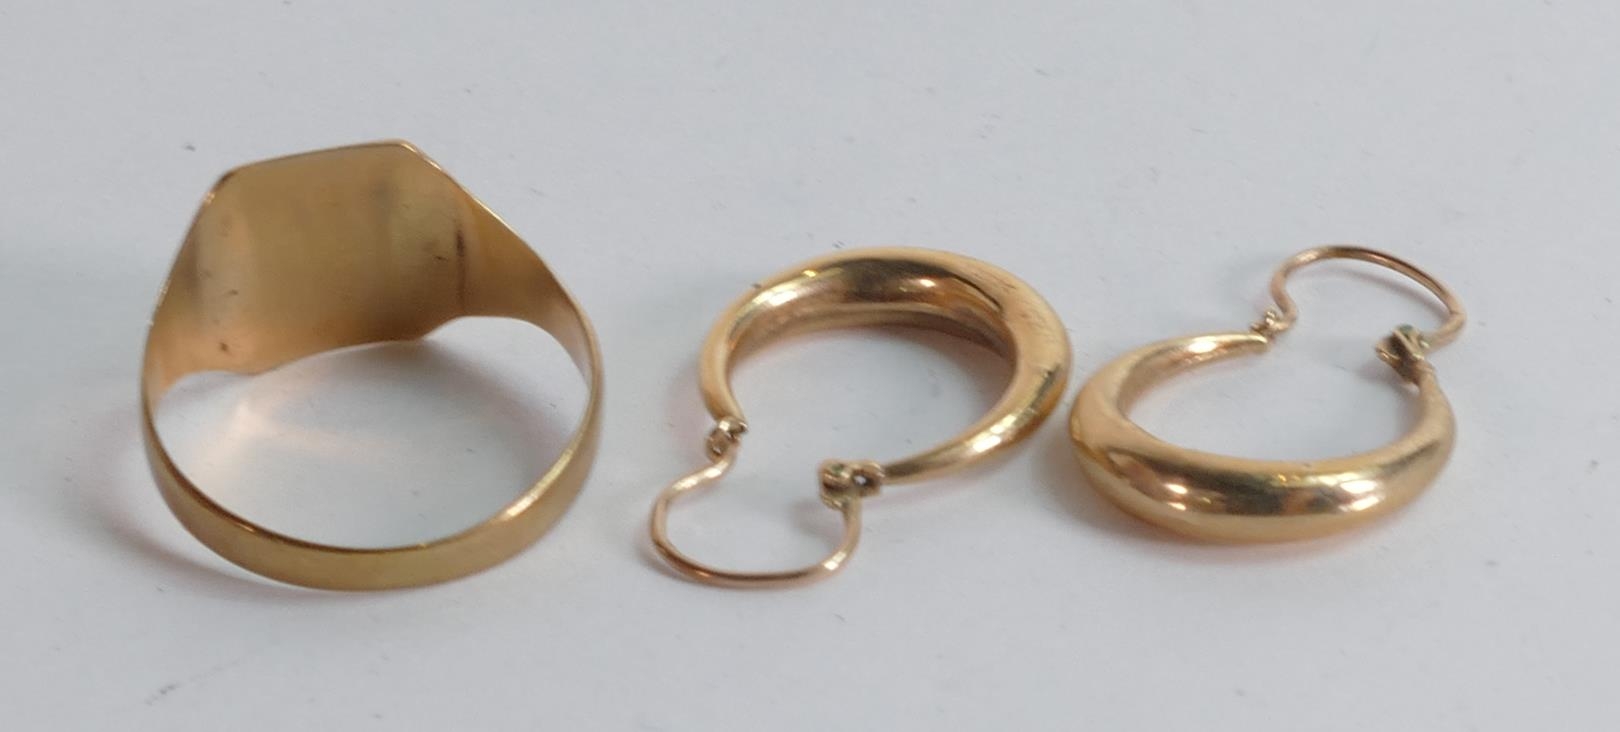 Hallmarked 9ct gold signet ring & pair 9ct earrings, gross weight 3.6g - Image 2 of 3